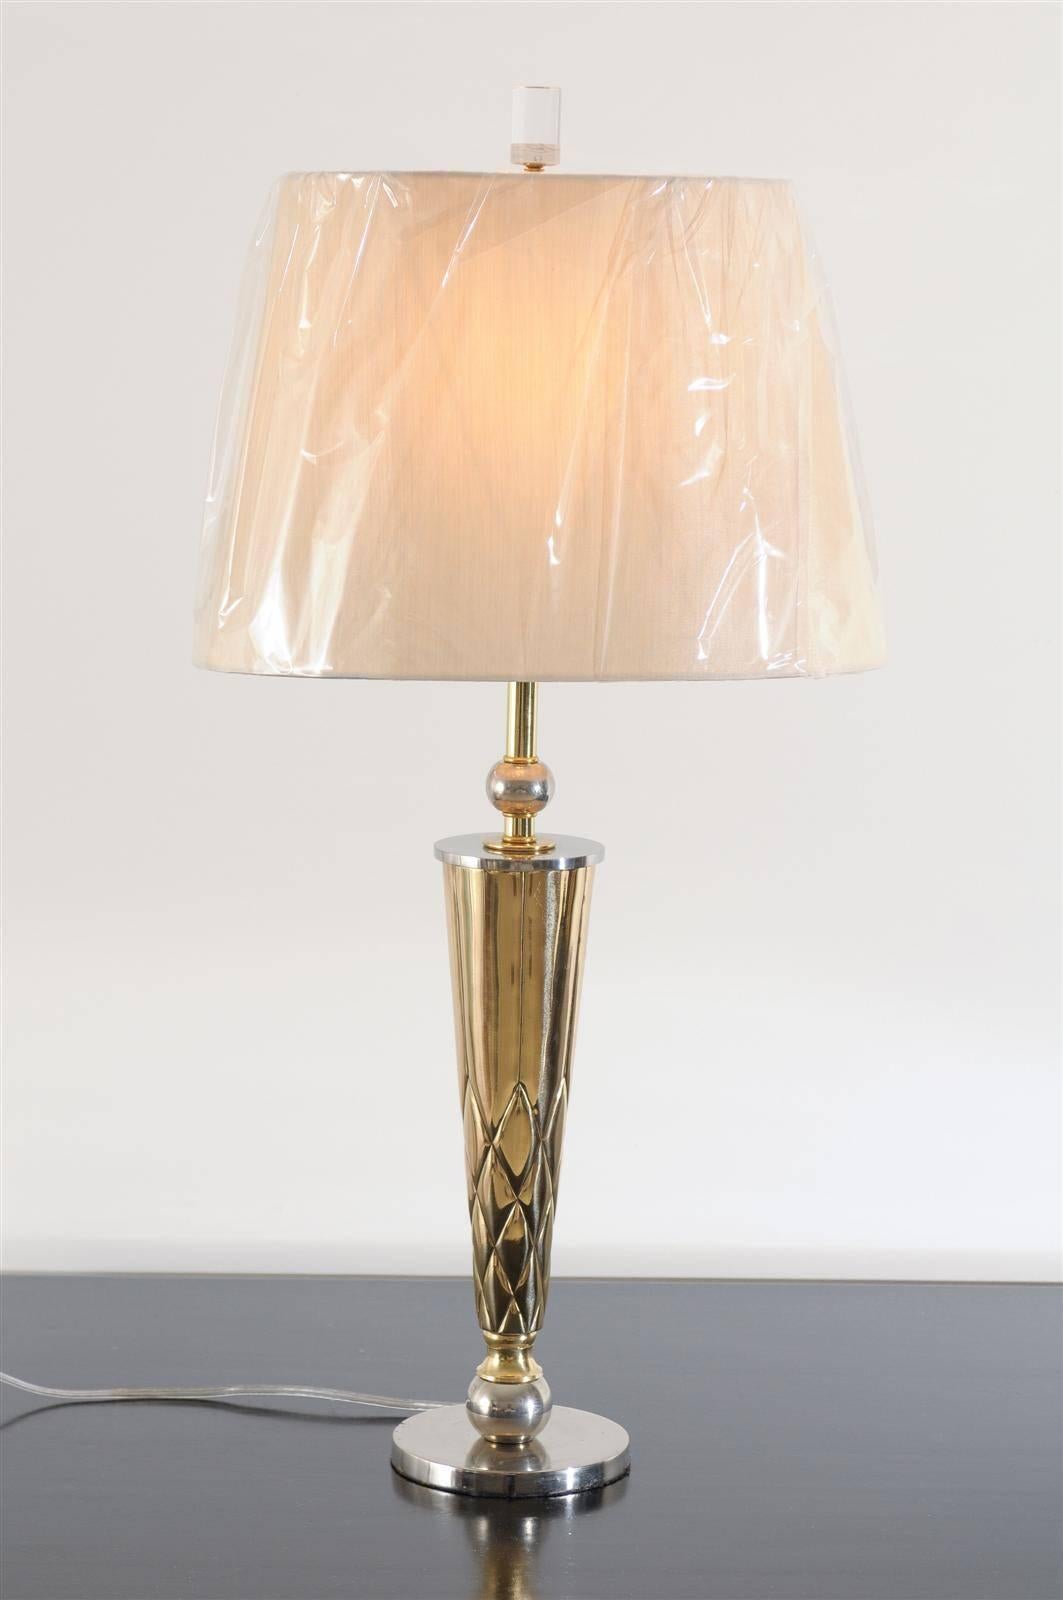 These magnificent lamps have been professionally restored and are shipped as photographed and described, complete with new shades, harps and finials.


An exceptional pair of vintage tornado style lamps, circa 1960. These unique, custom-made pieces